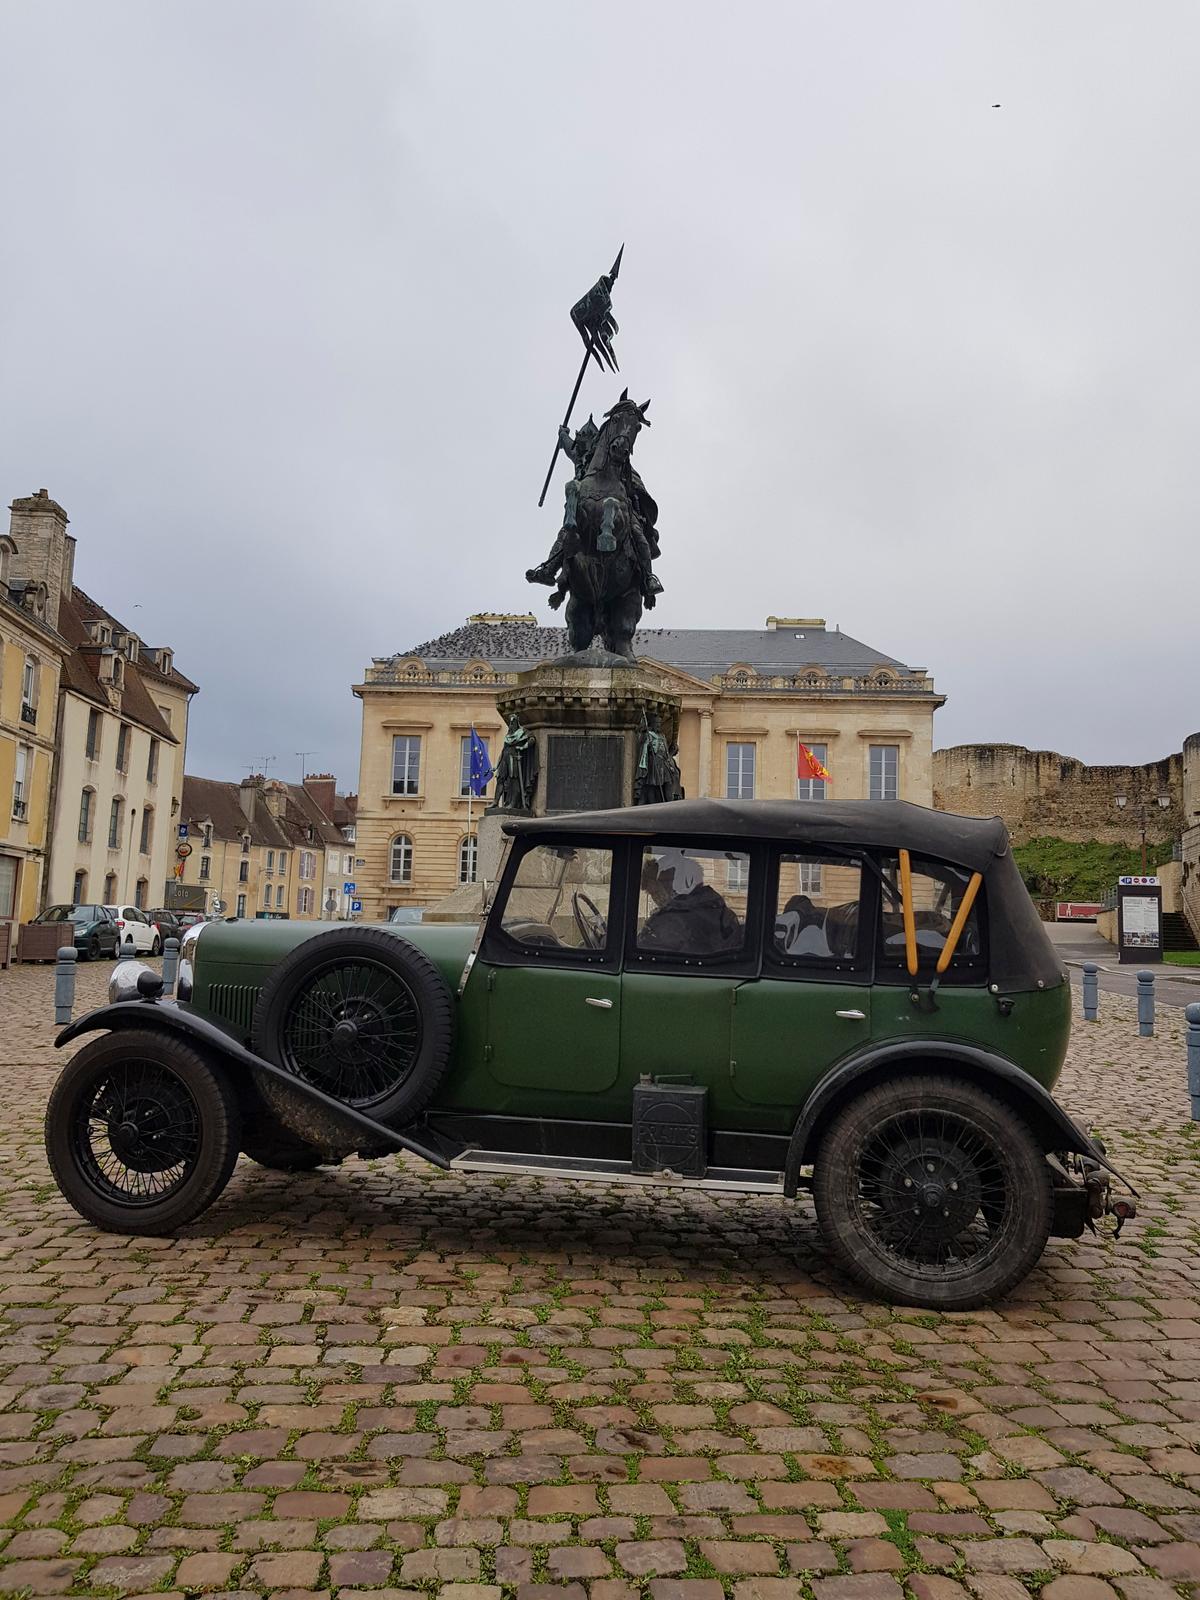 Mark's 1931 Alvis pictured in France, again. (Courtesy of Caters News)